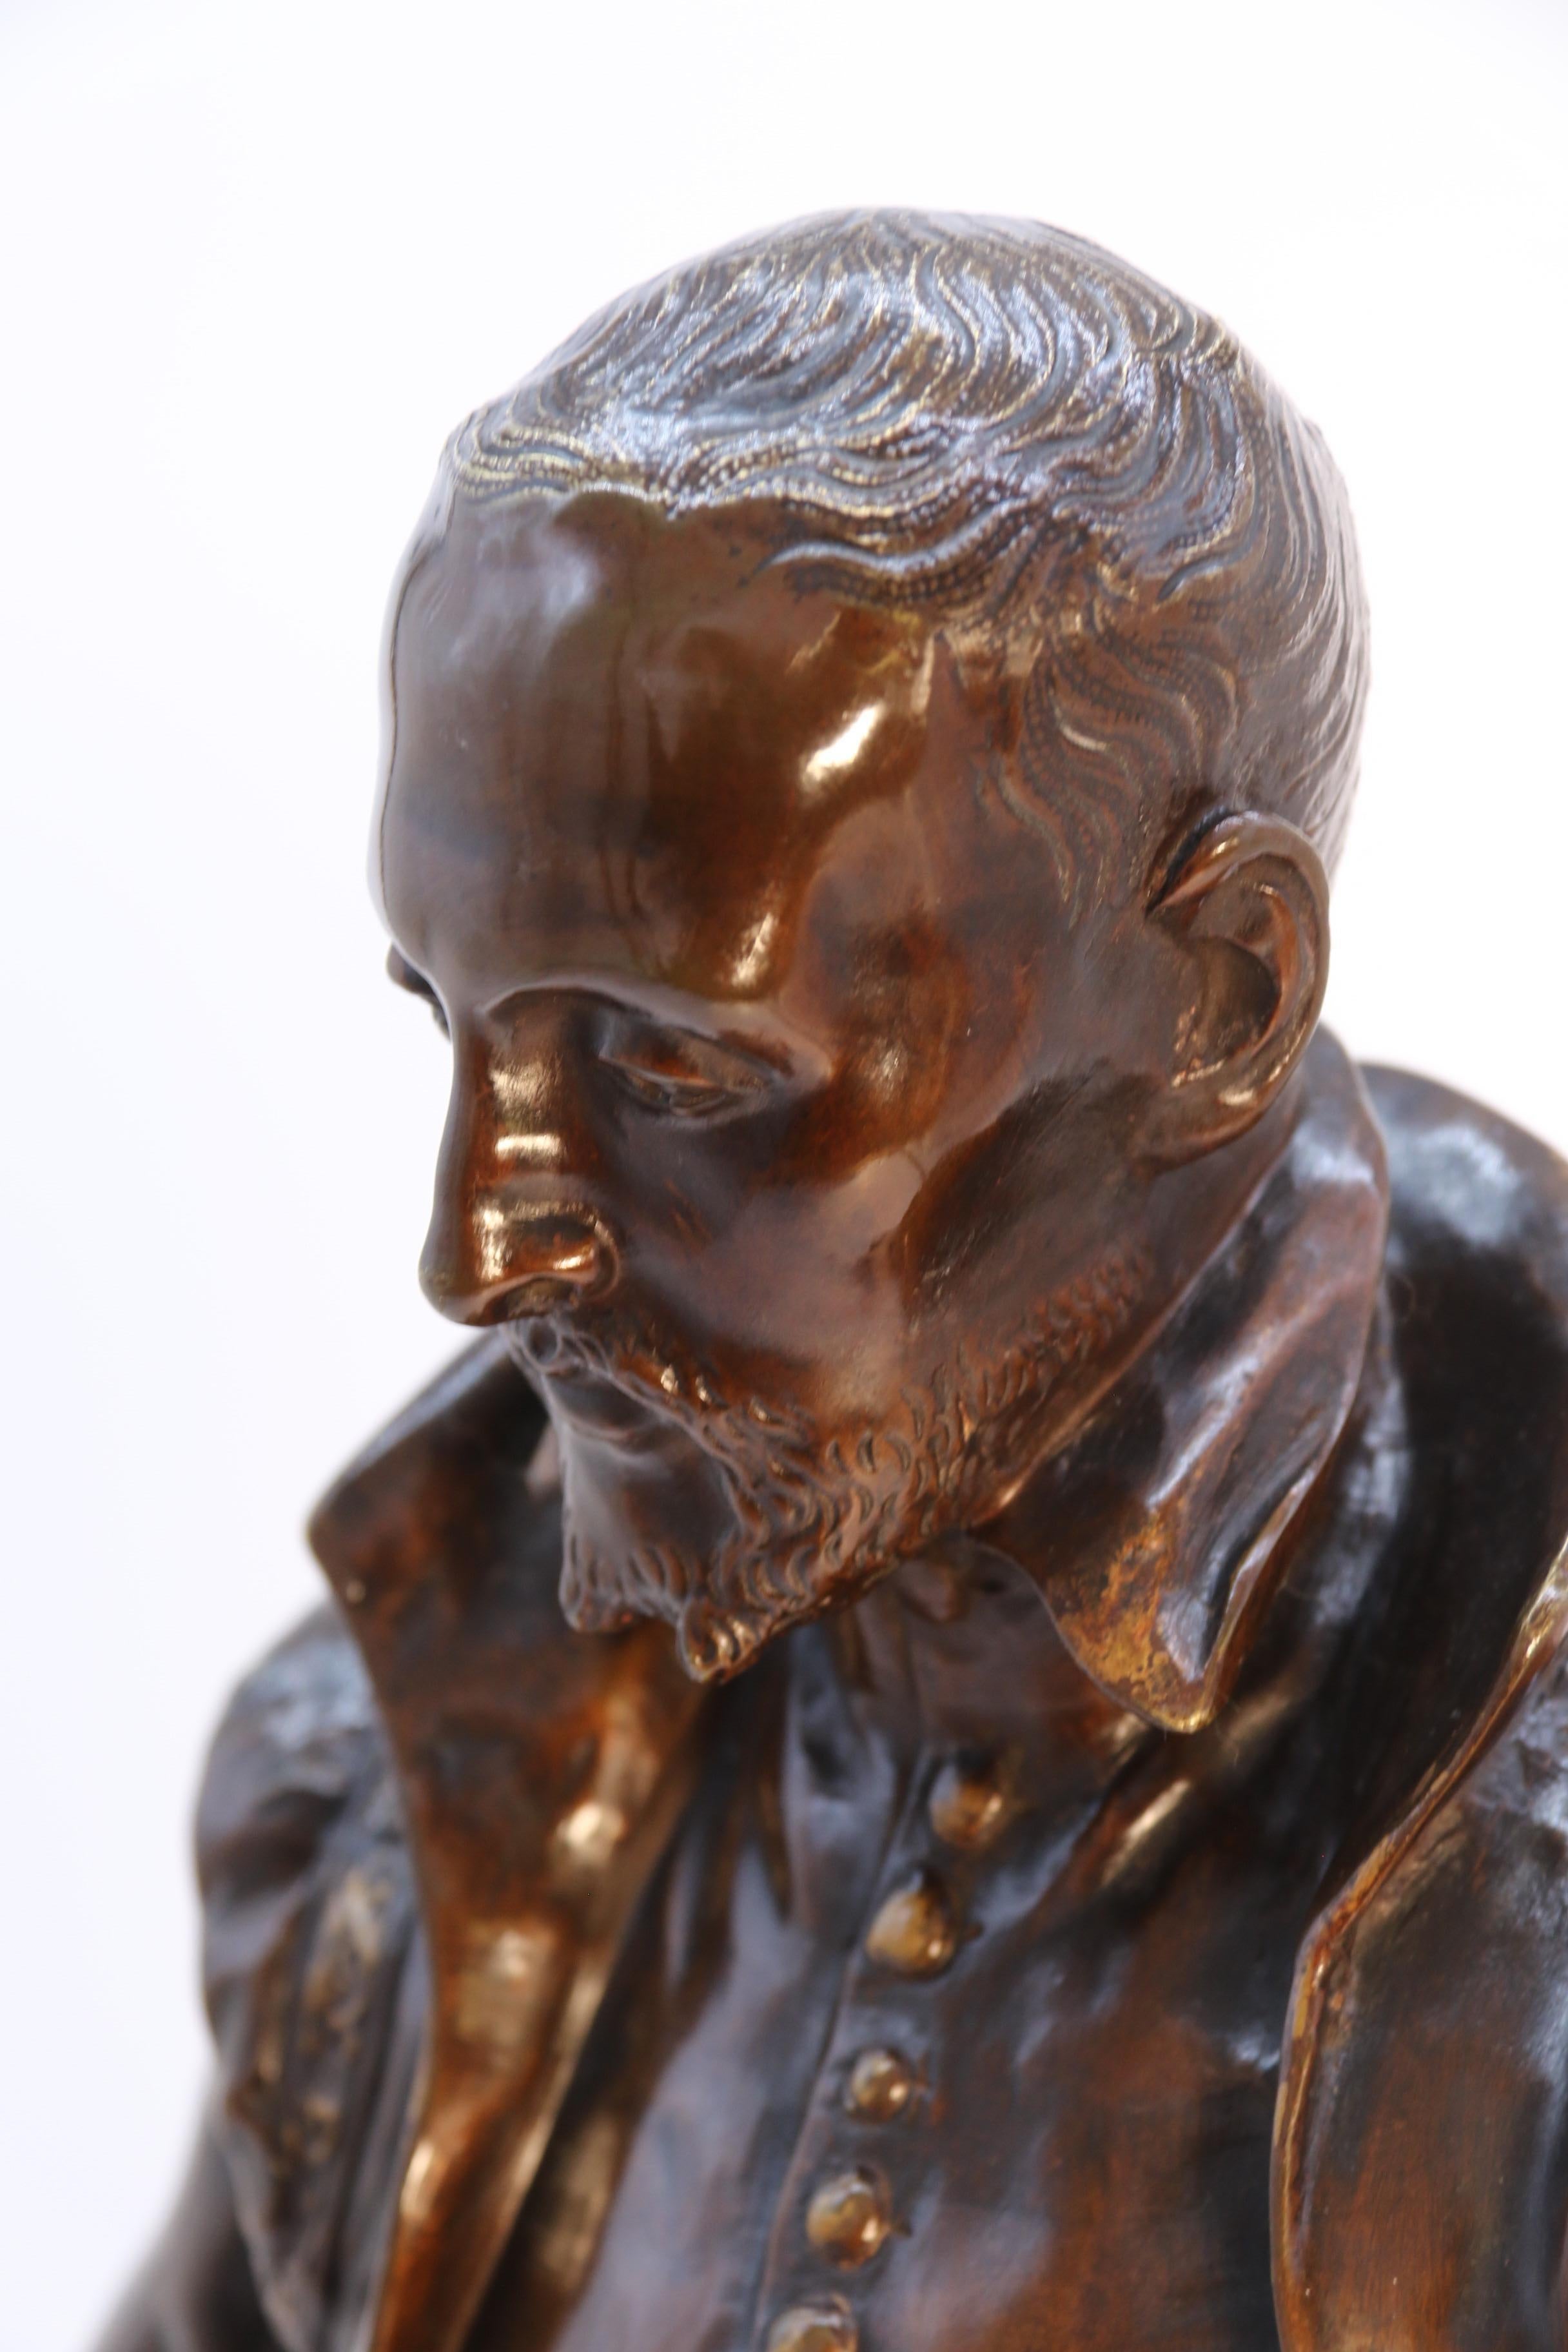 The 19th century bronze study of the French poet Joachim de Bellay by L Adolphe en vente 8